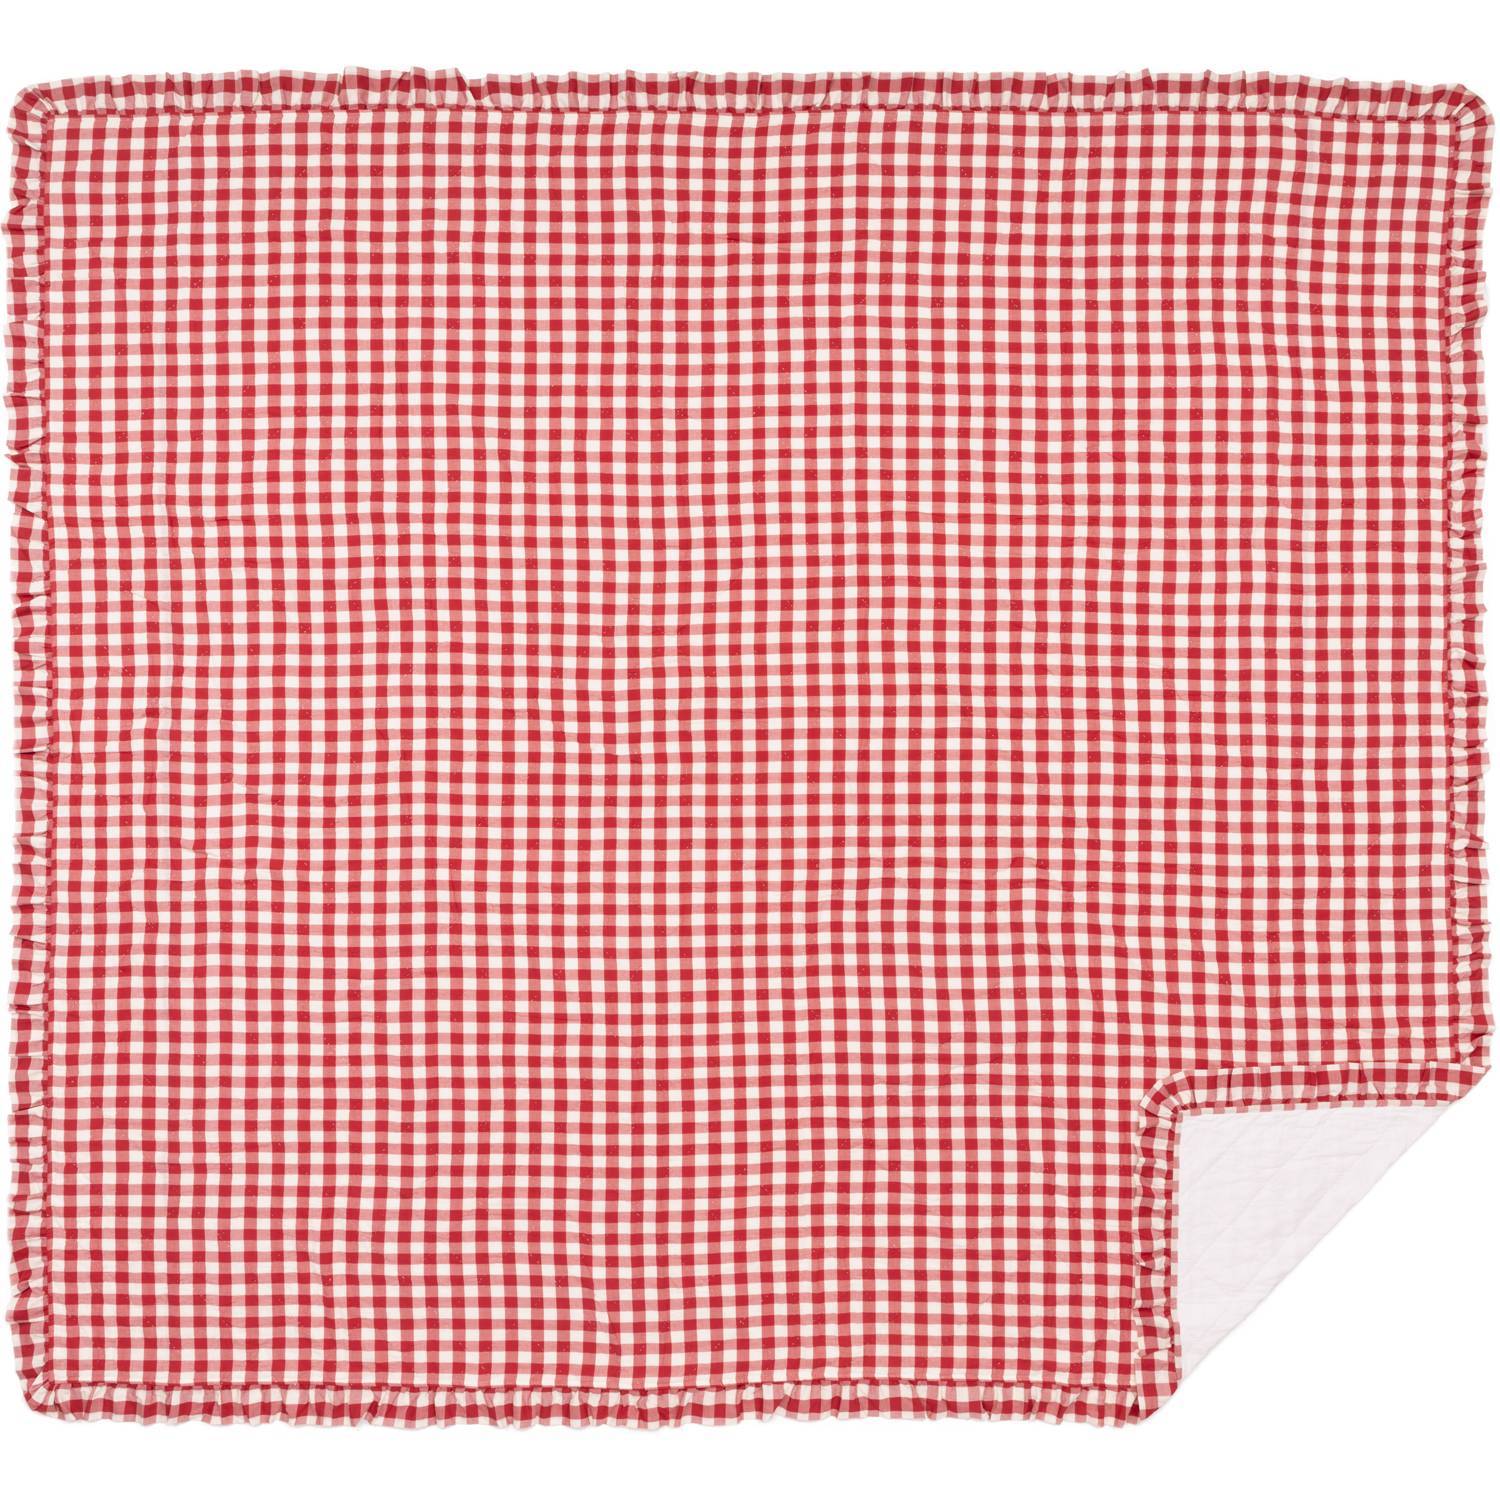 Annie Buffalo Red Check Ruffled King Quilt Coverlet 105wx95l The